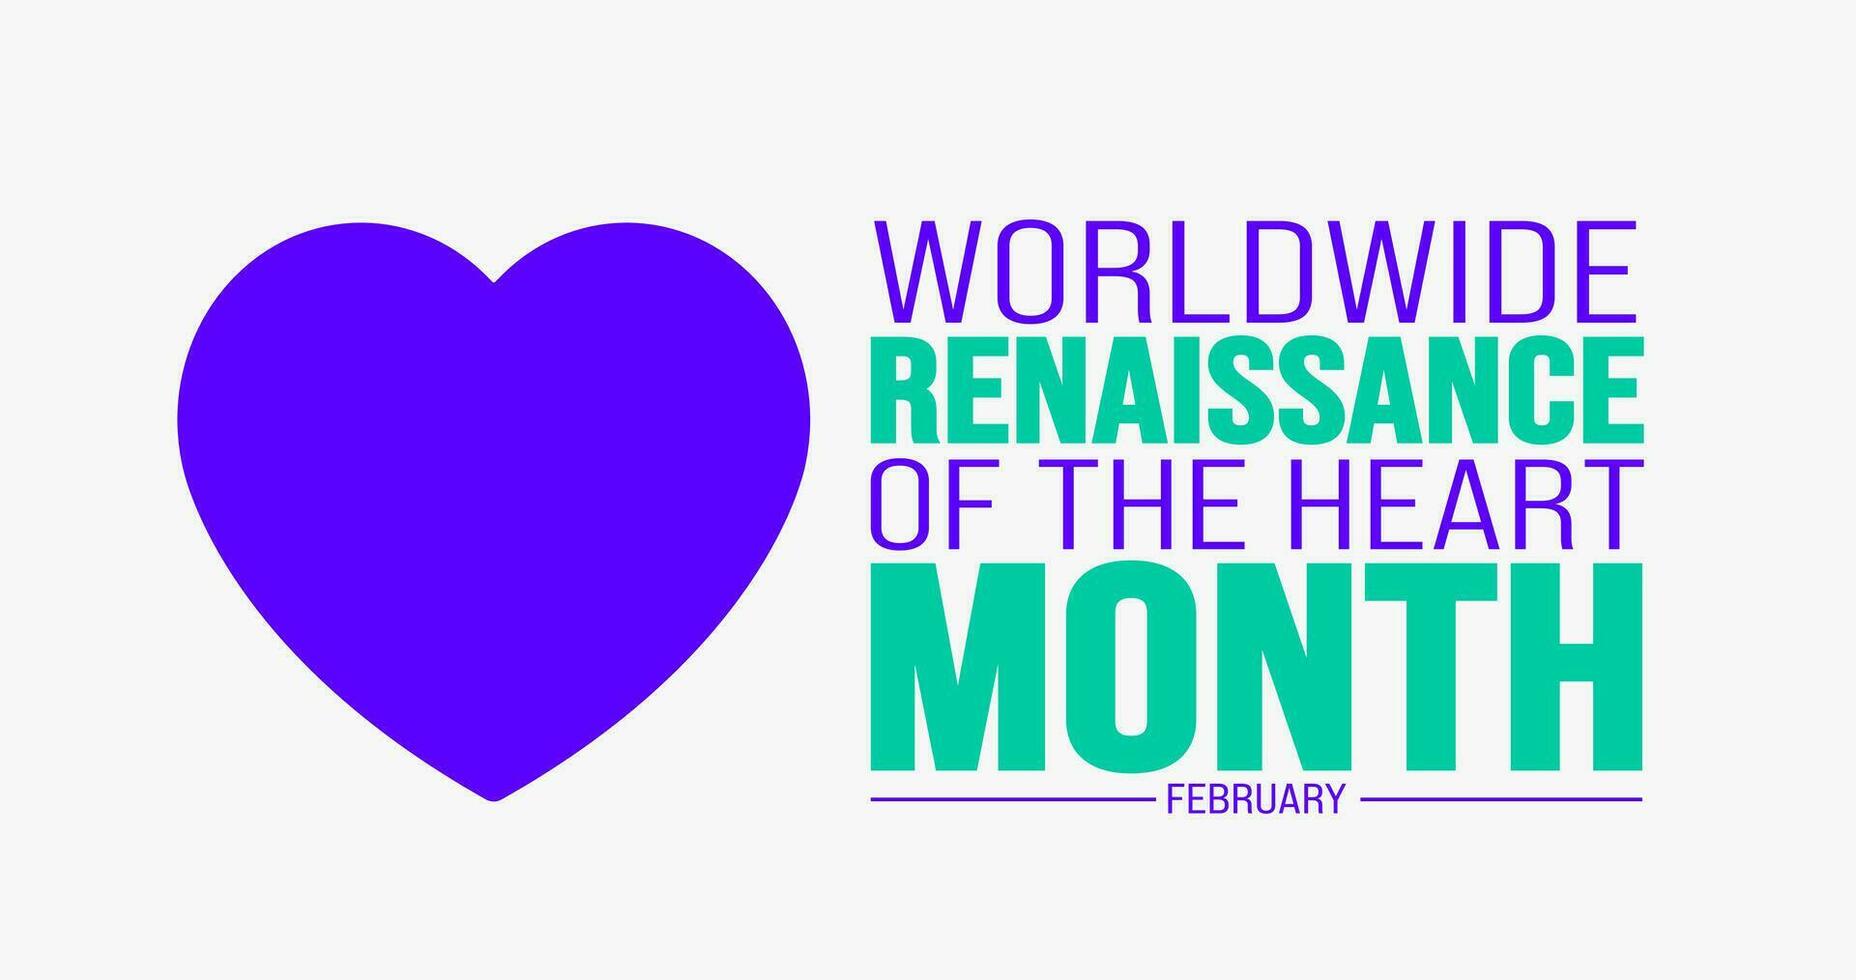 February is Worldwide Renaissance of the Heart Month background template. Holiday concept. background, banner, placard, card, and poster design template with text inscription and standard color. vector